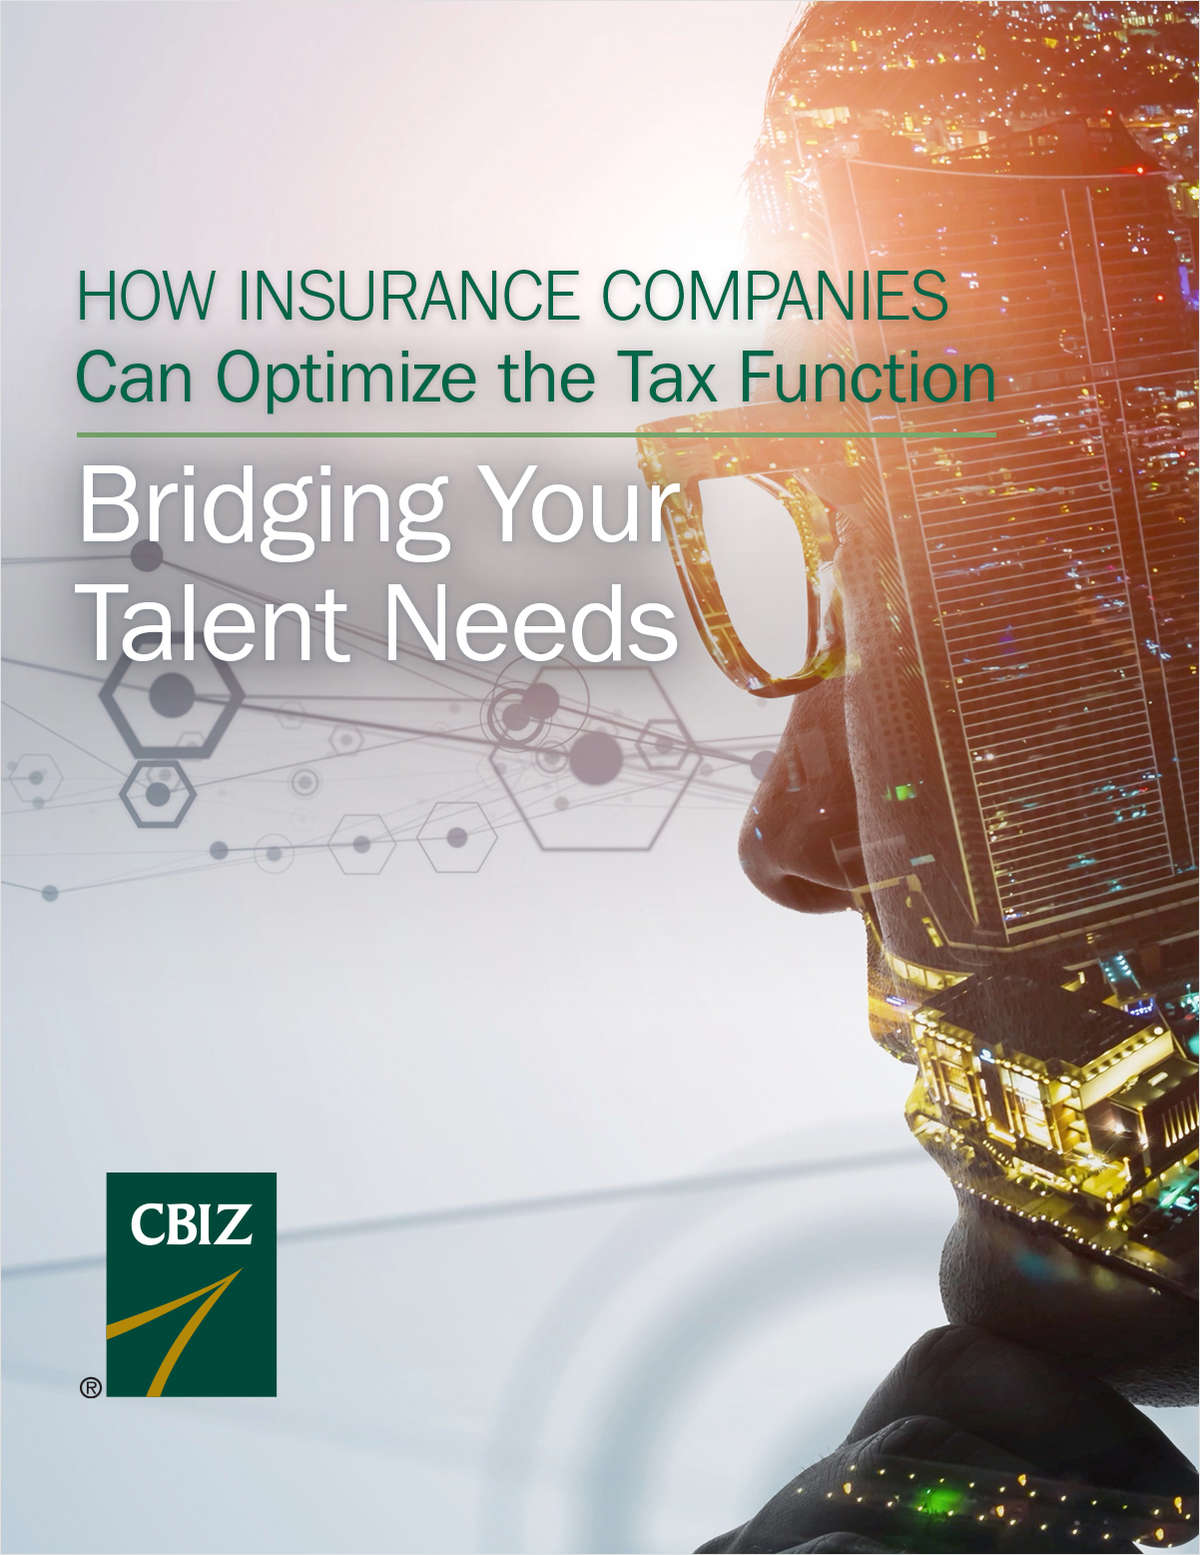 How Insurance Companies Can Optimize the Tax Function: Bridging Your Talent Needs